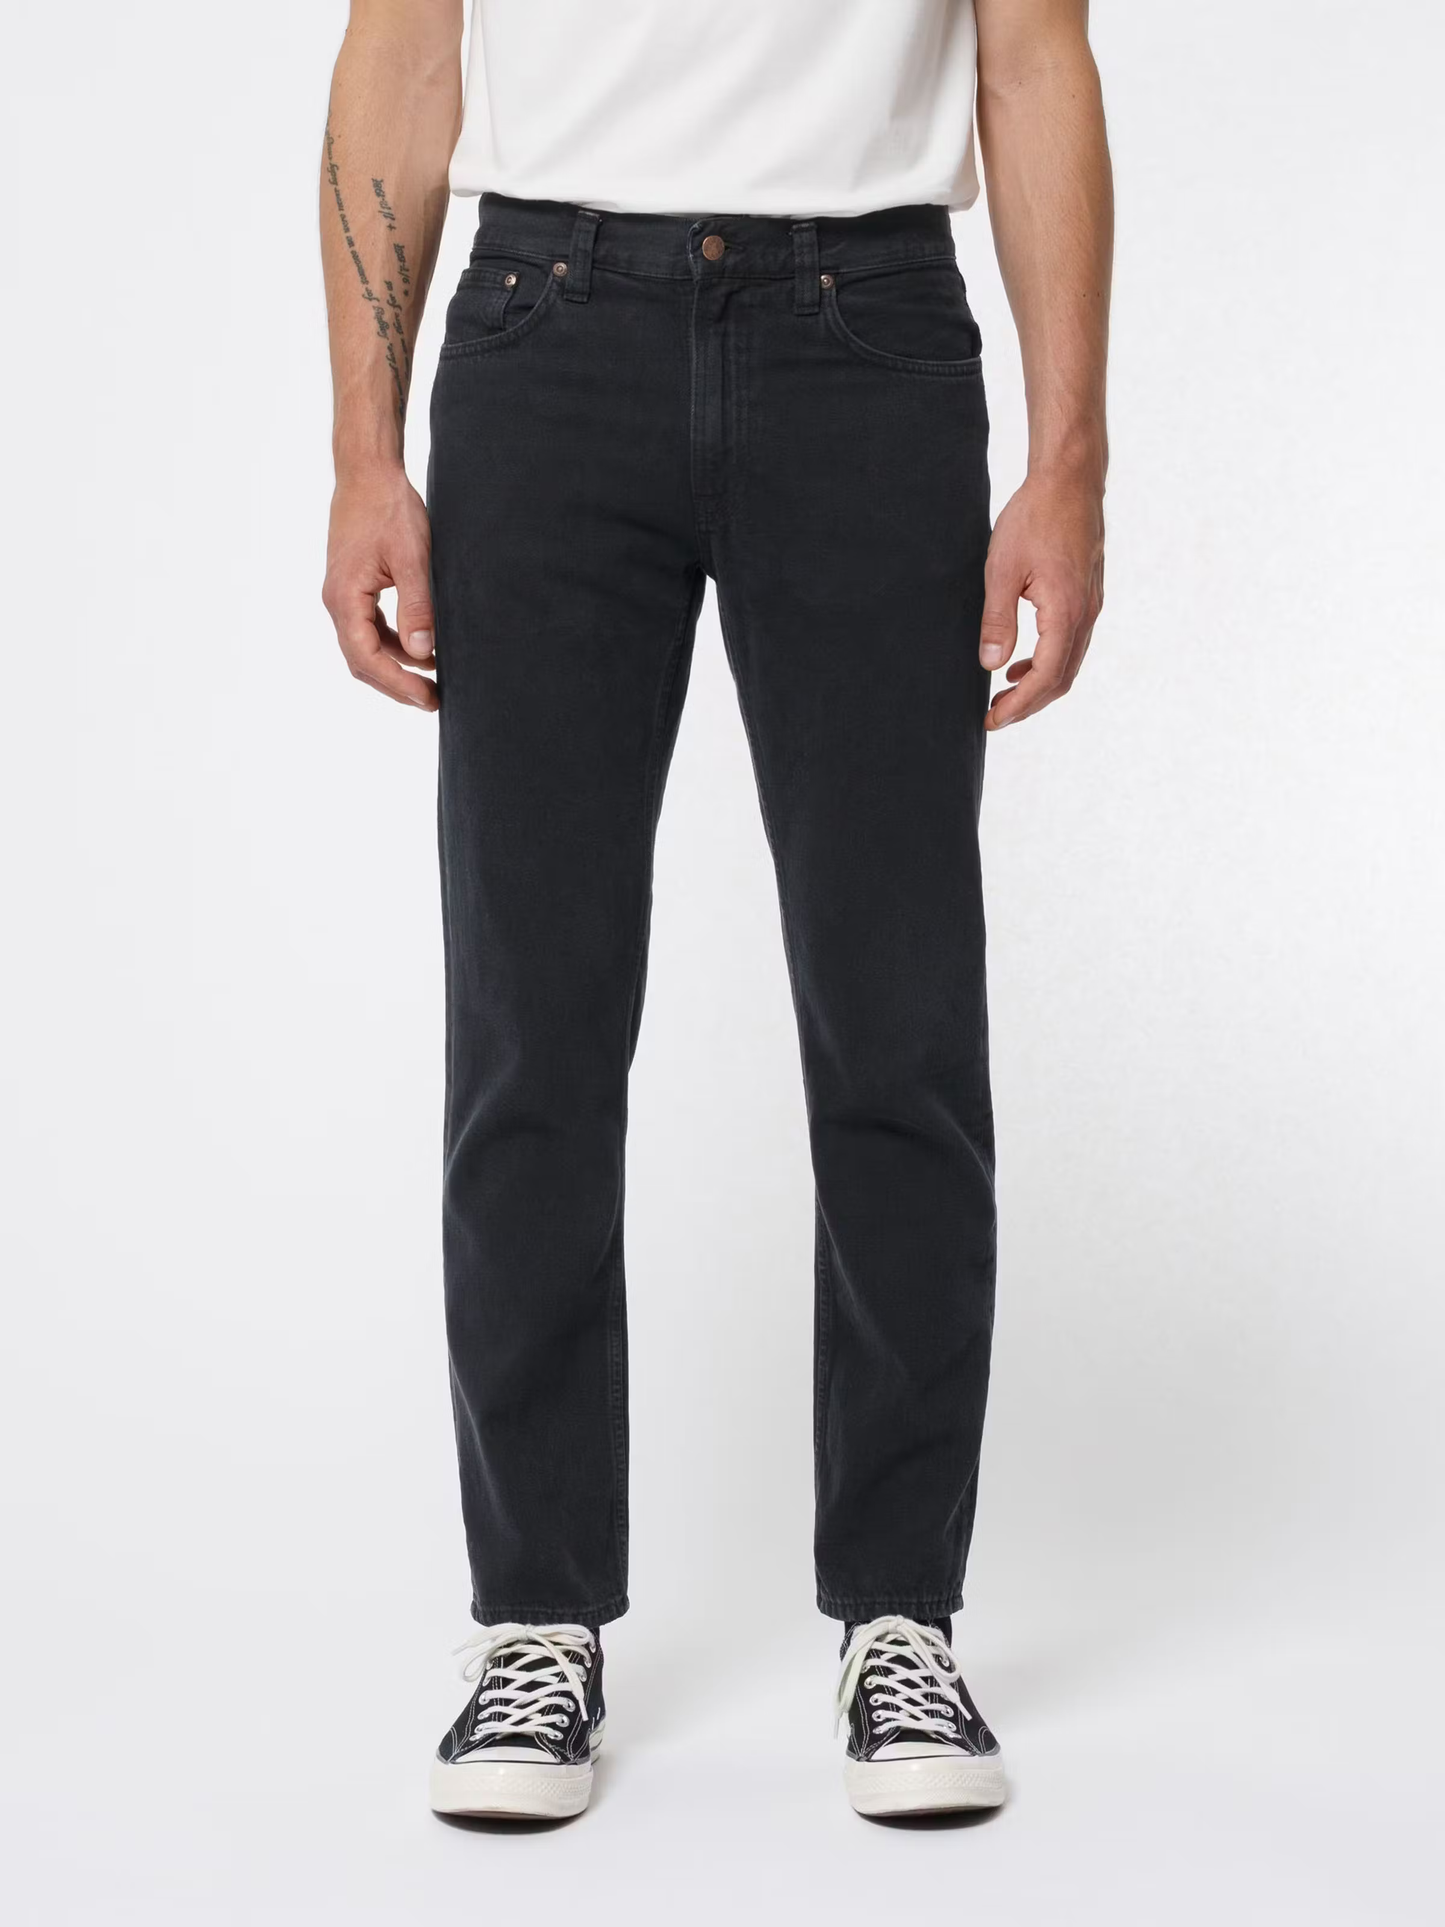 Nudie Jeans Gritty Jackson Jean L32 Black Forest